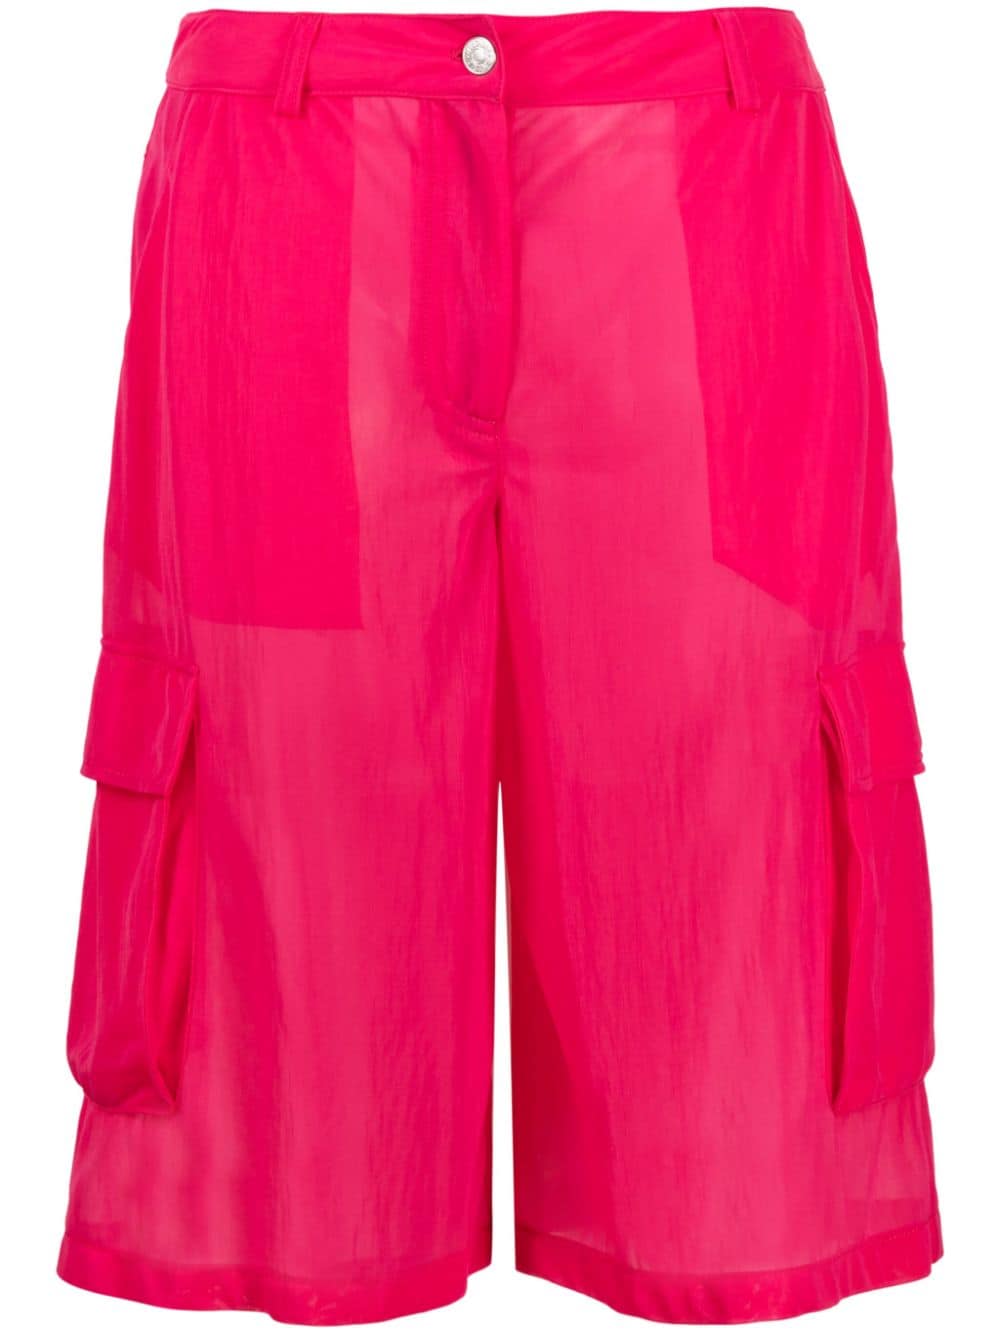 MOSCHINO JEANS sheer knee-length shorts - Pink von MOSCHINO JEANS